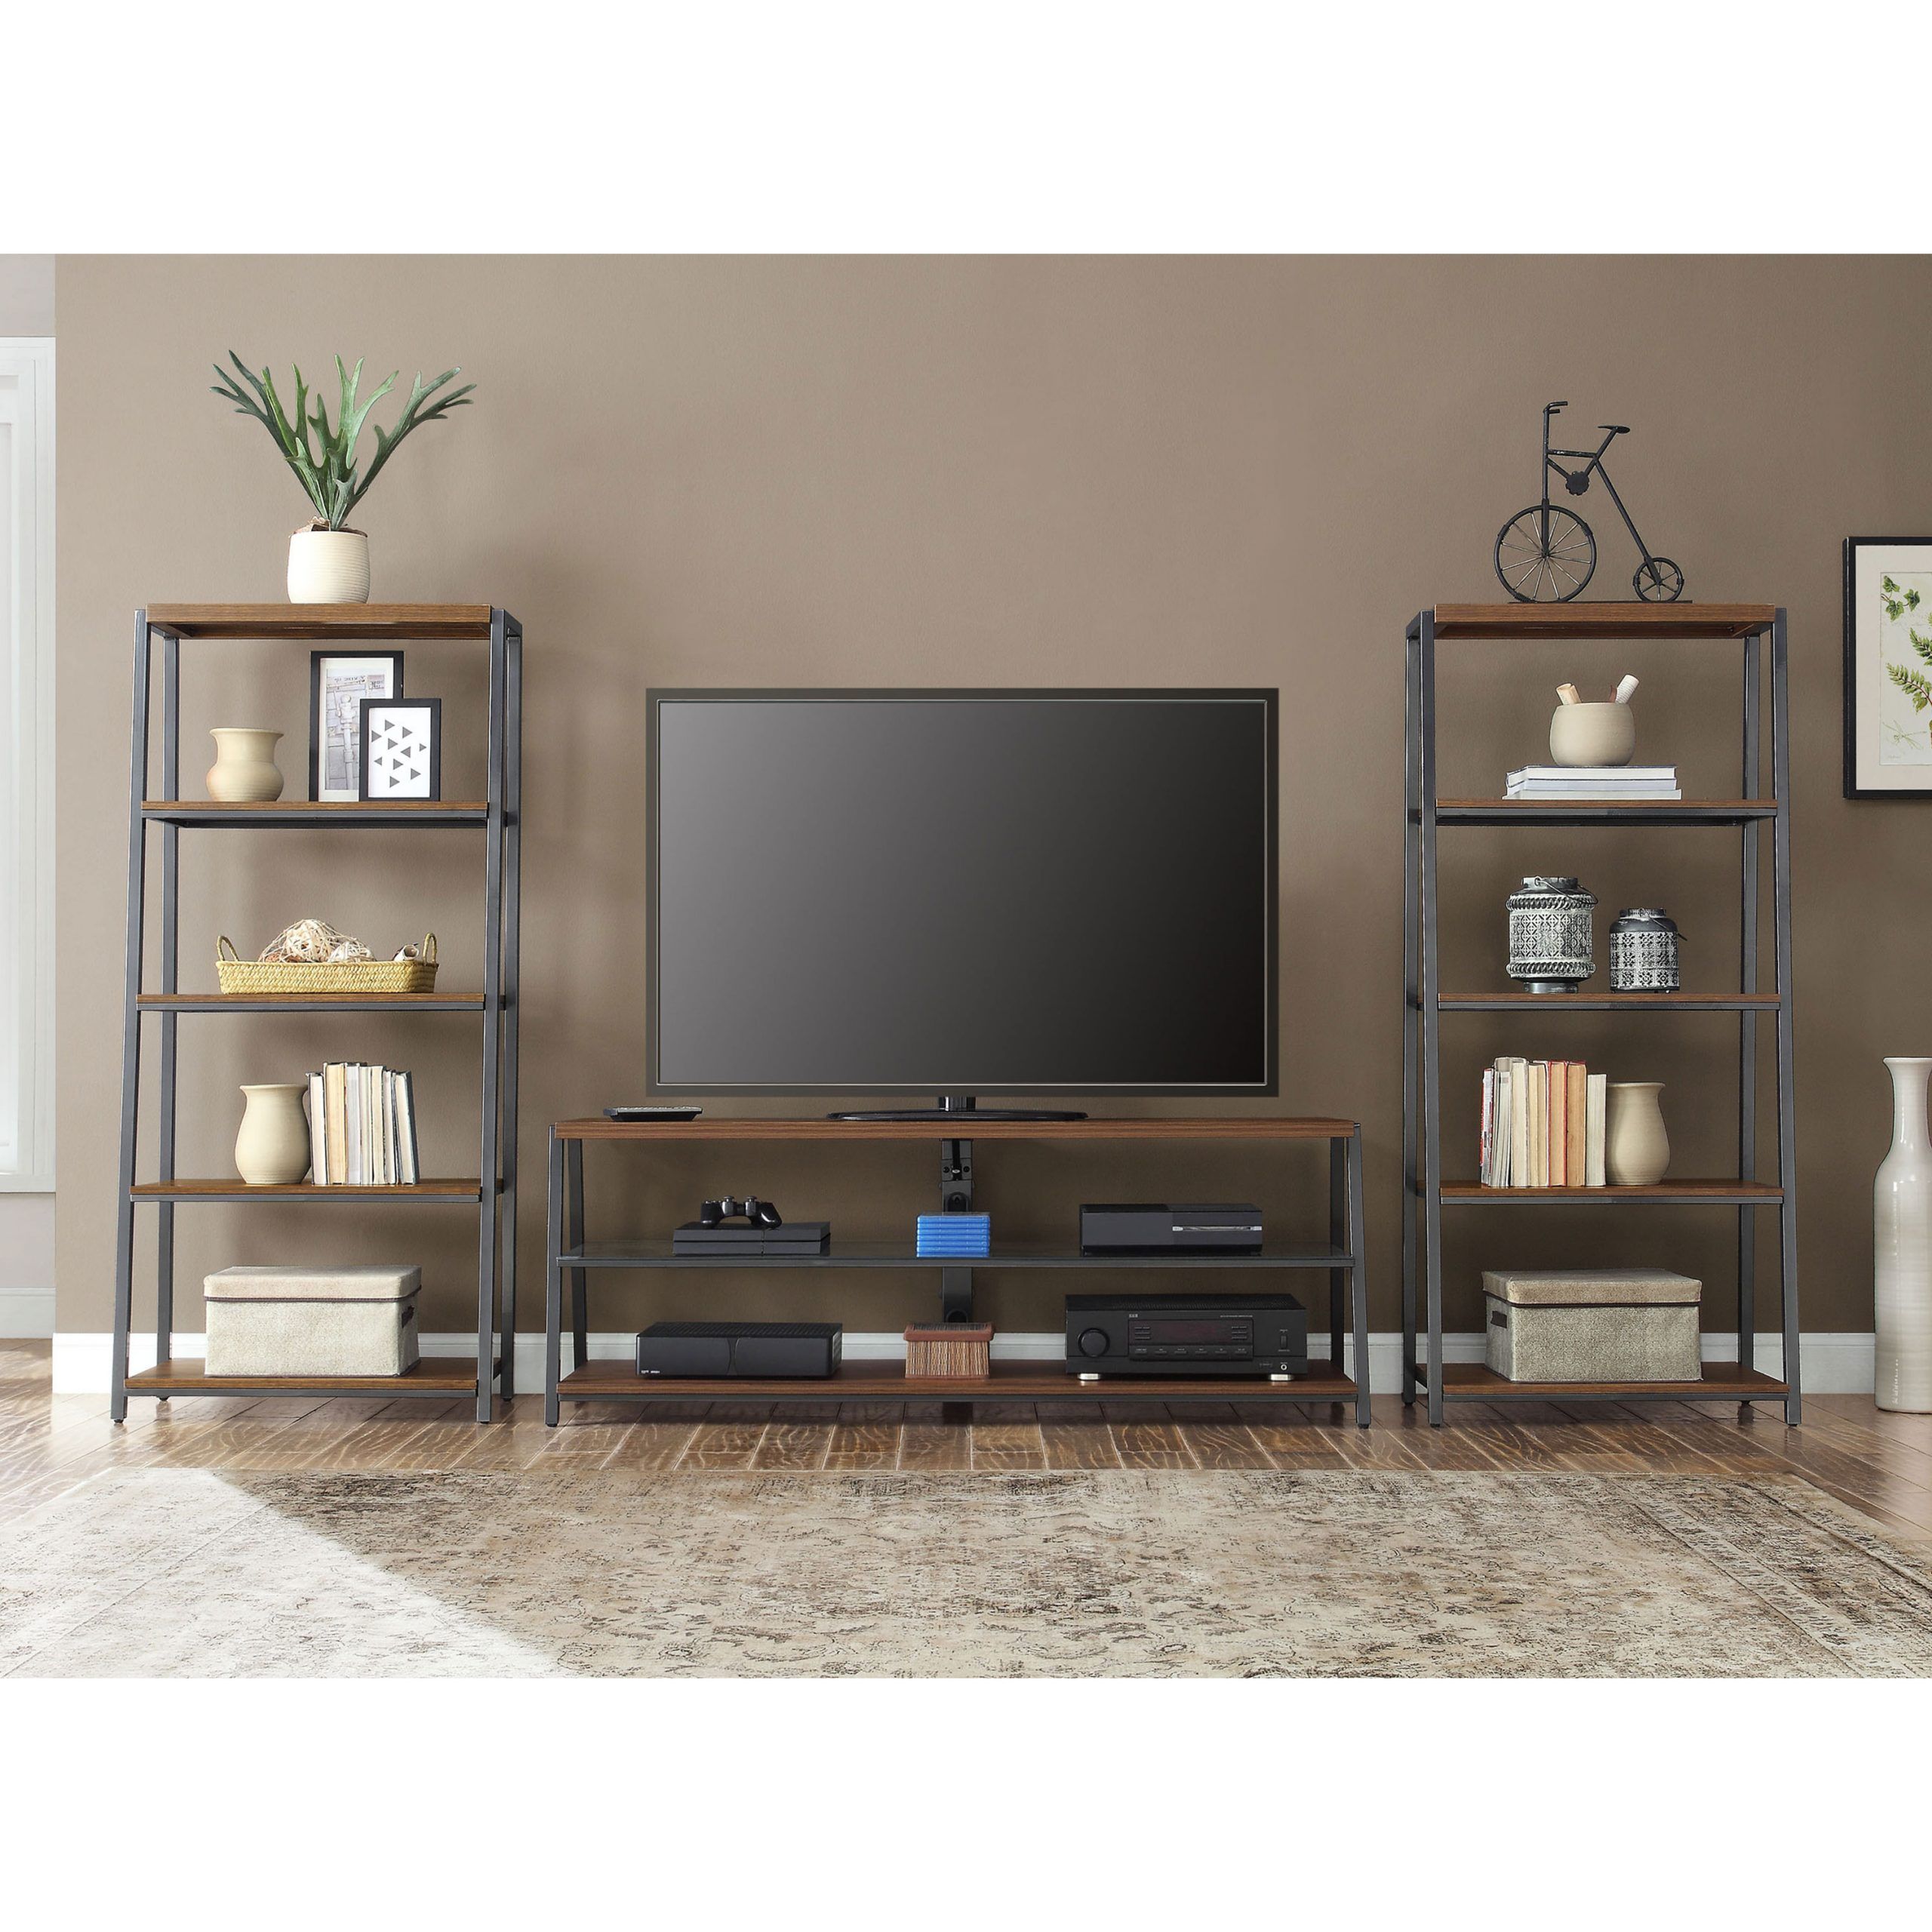 Mainstays Arris Tv Stand For 70" Flat Panel Tvs And (2) 4 For Mainstays Arris 3 In 1 Tv Stands In Canyon Walnut Finish (Gallery 15 of 20)